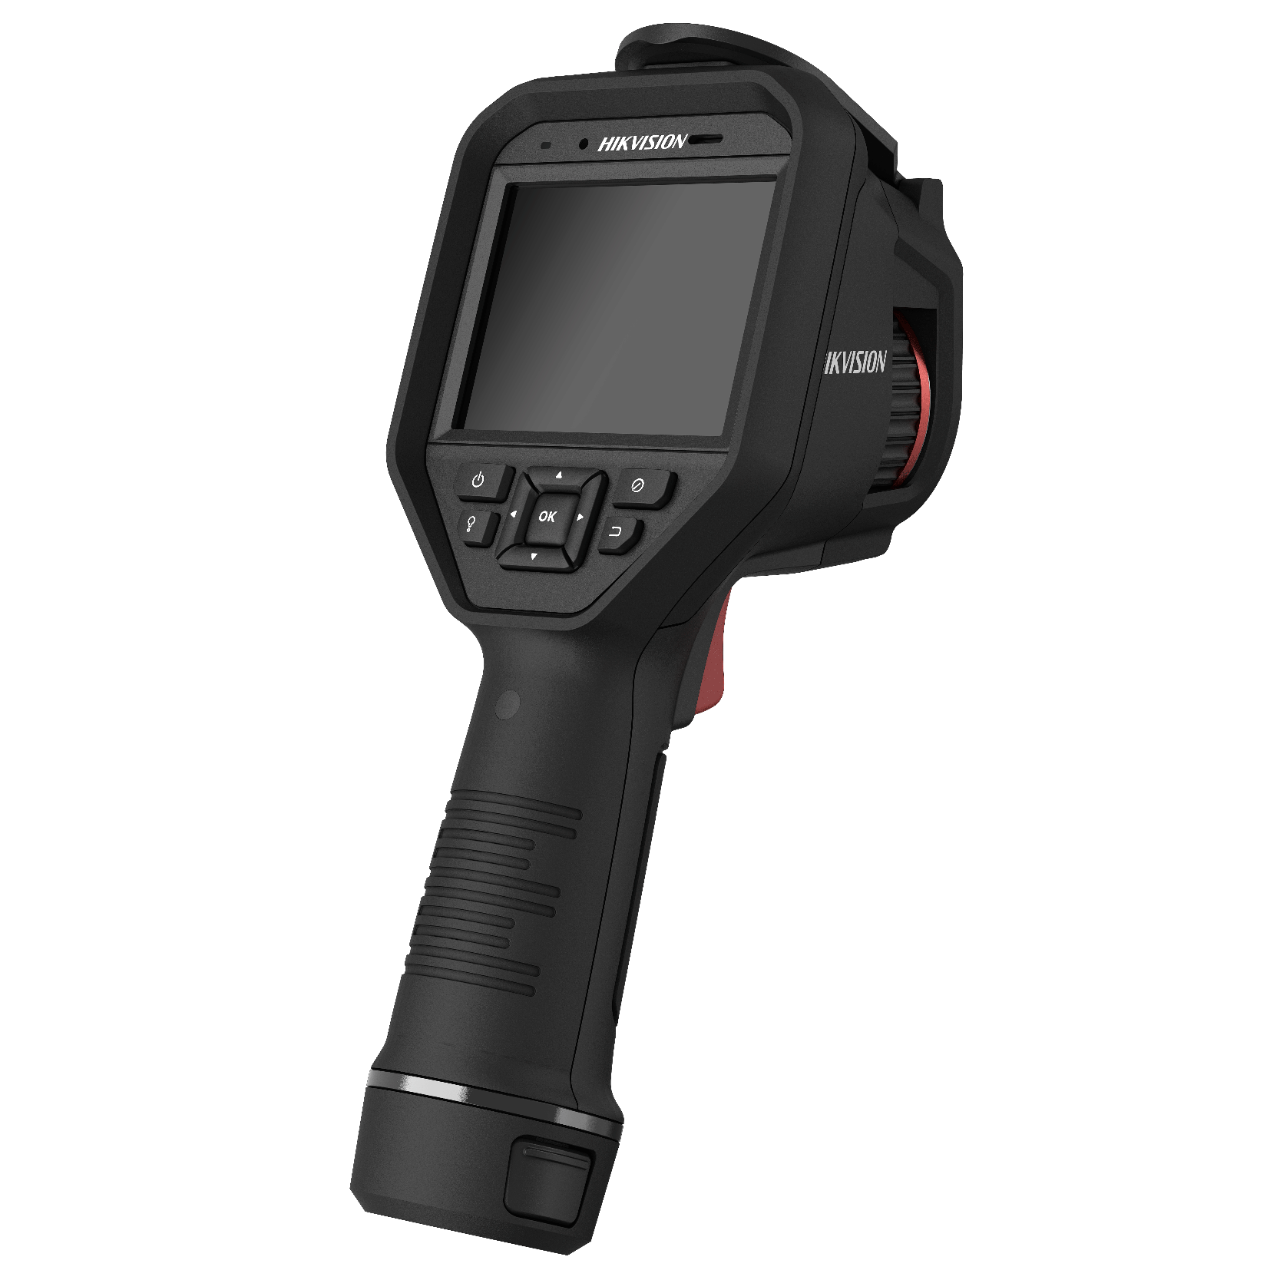 Cape Thermal - DS-2TP21-6AVF/W Hikvision Handheld Thermal Camera with Touchscreen